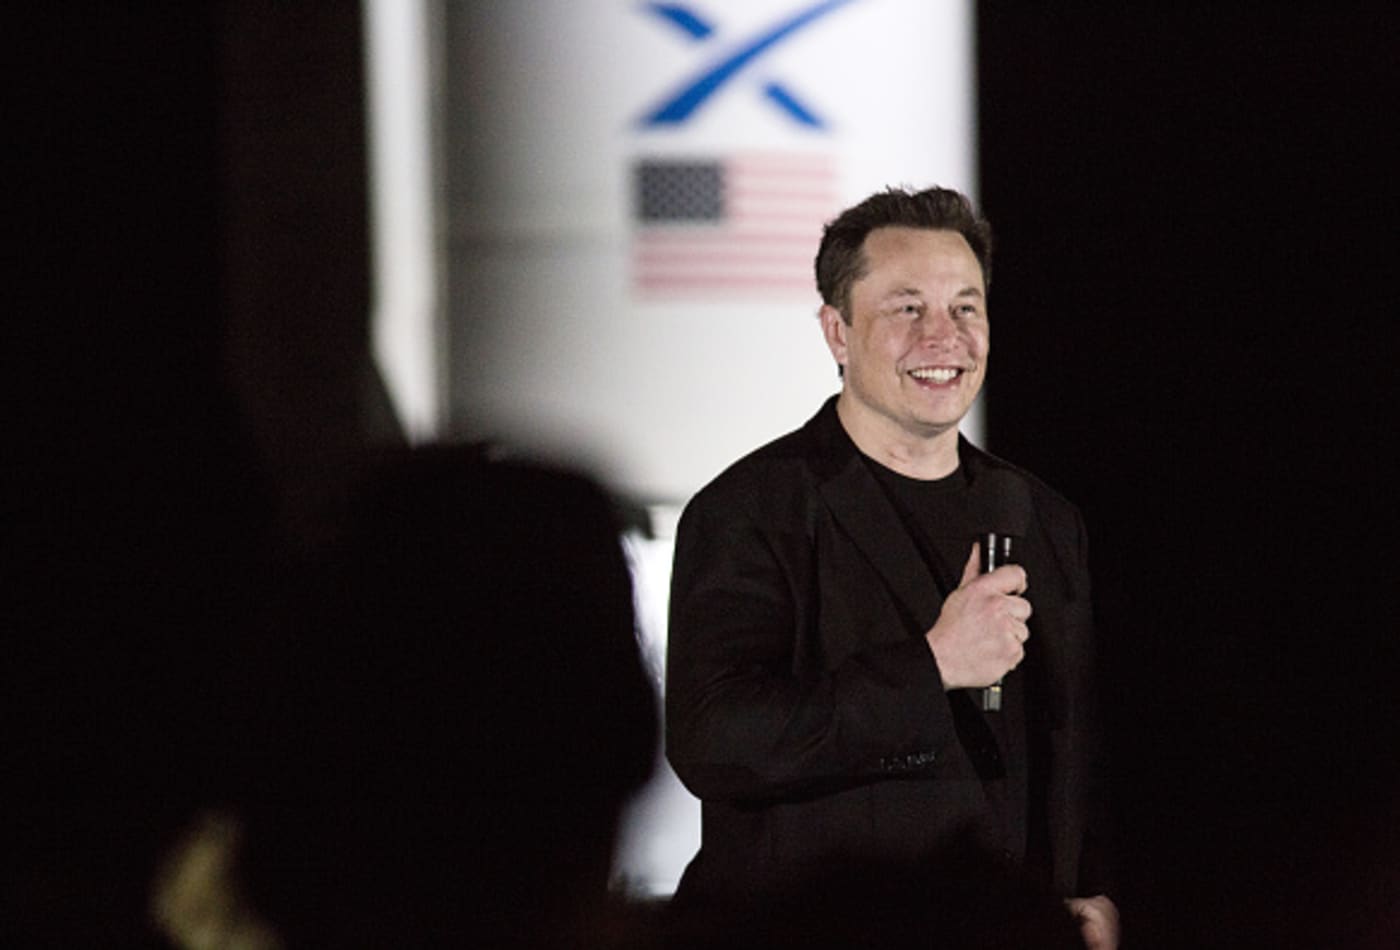 Elon Musk tweets he's recruiting for SpaceX, willing to train